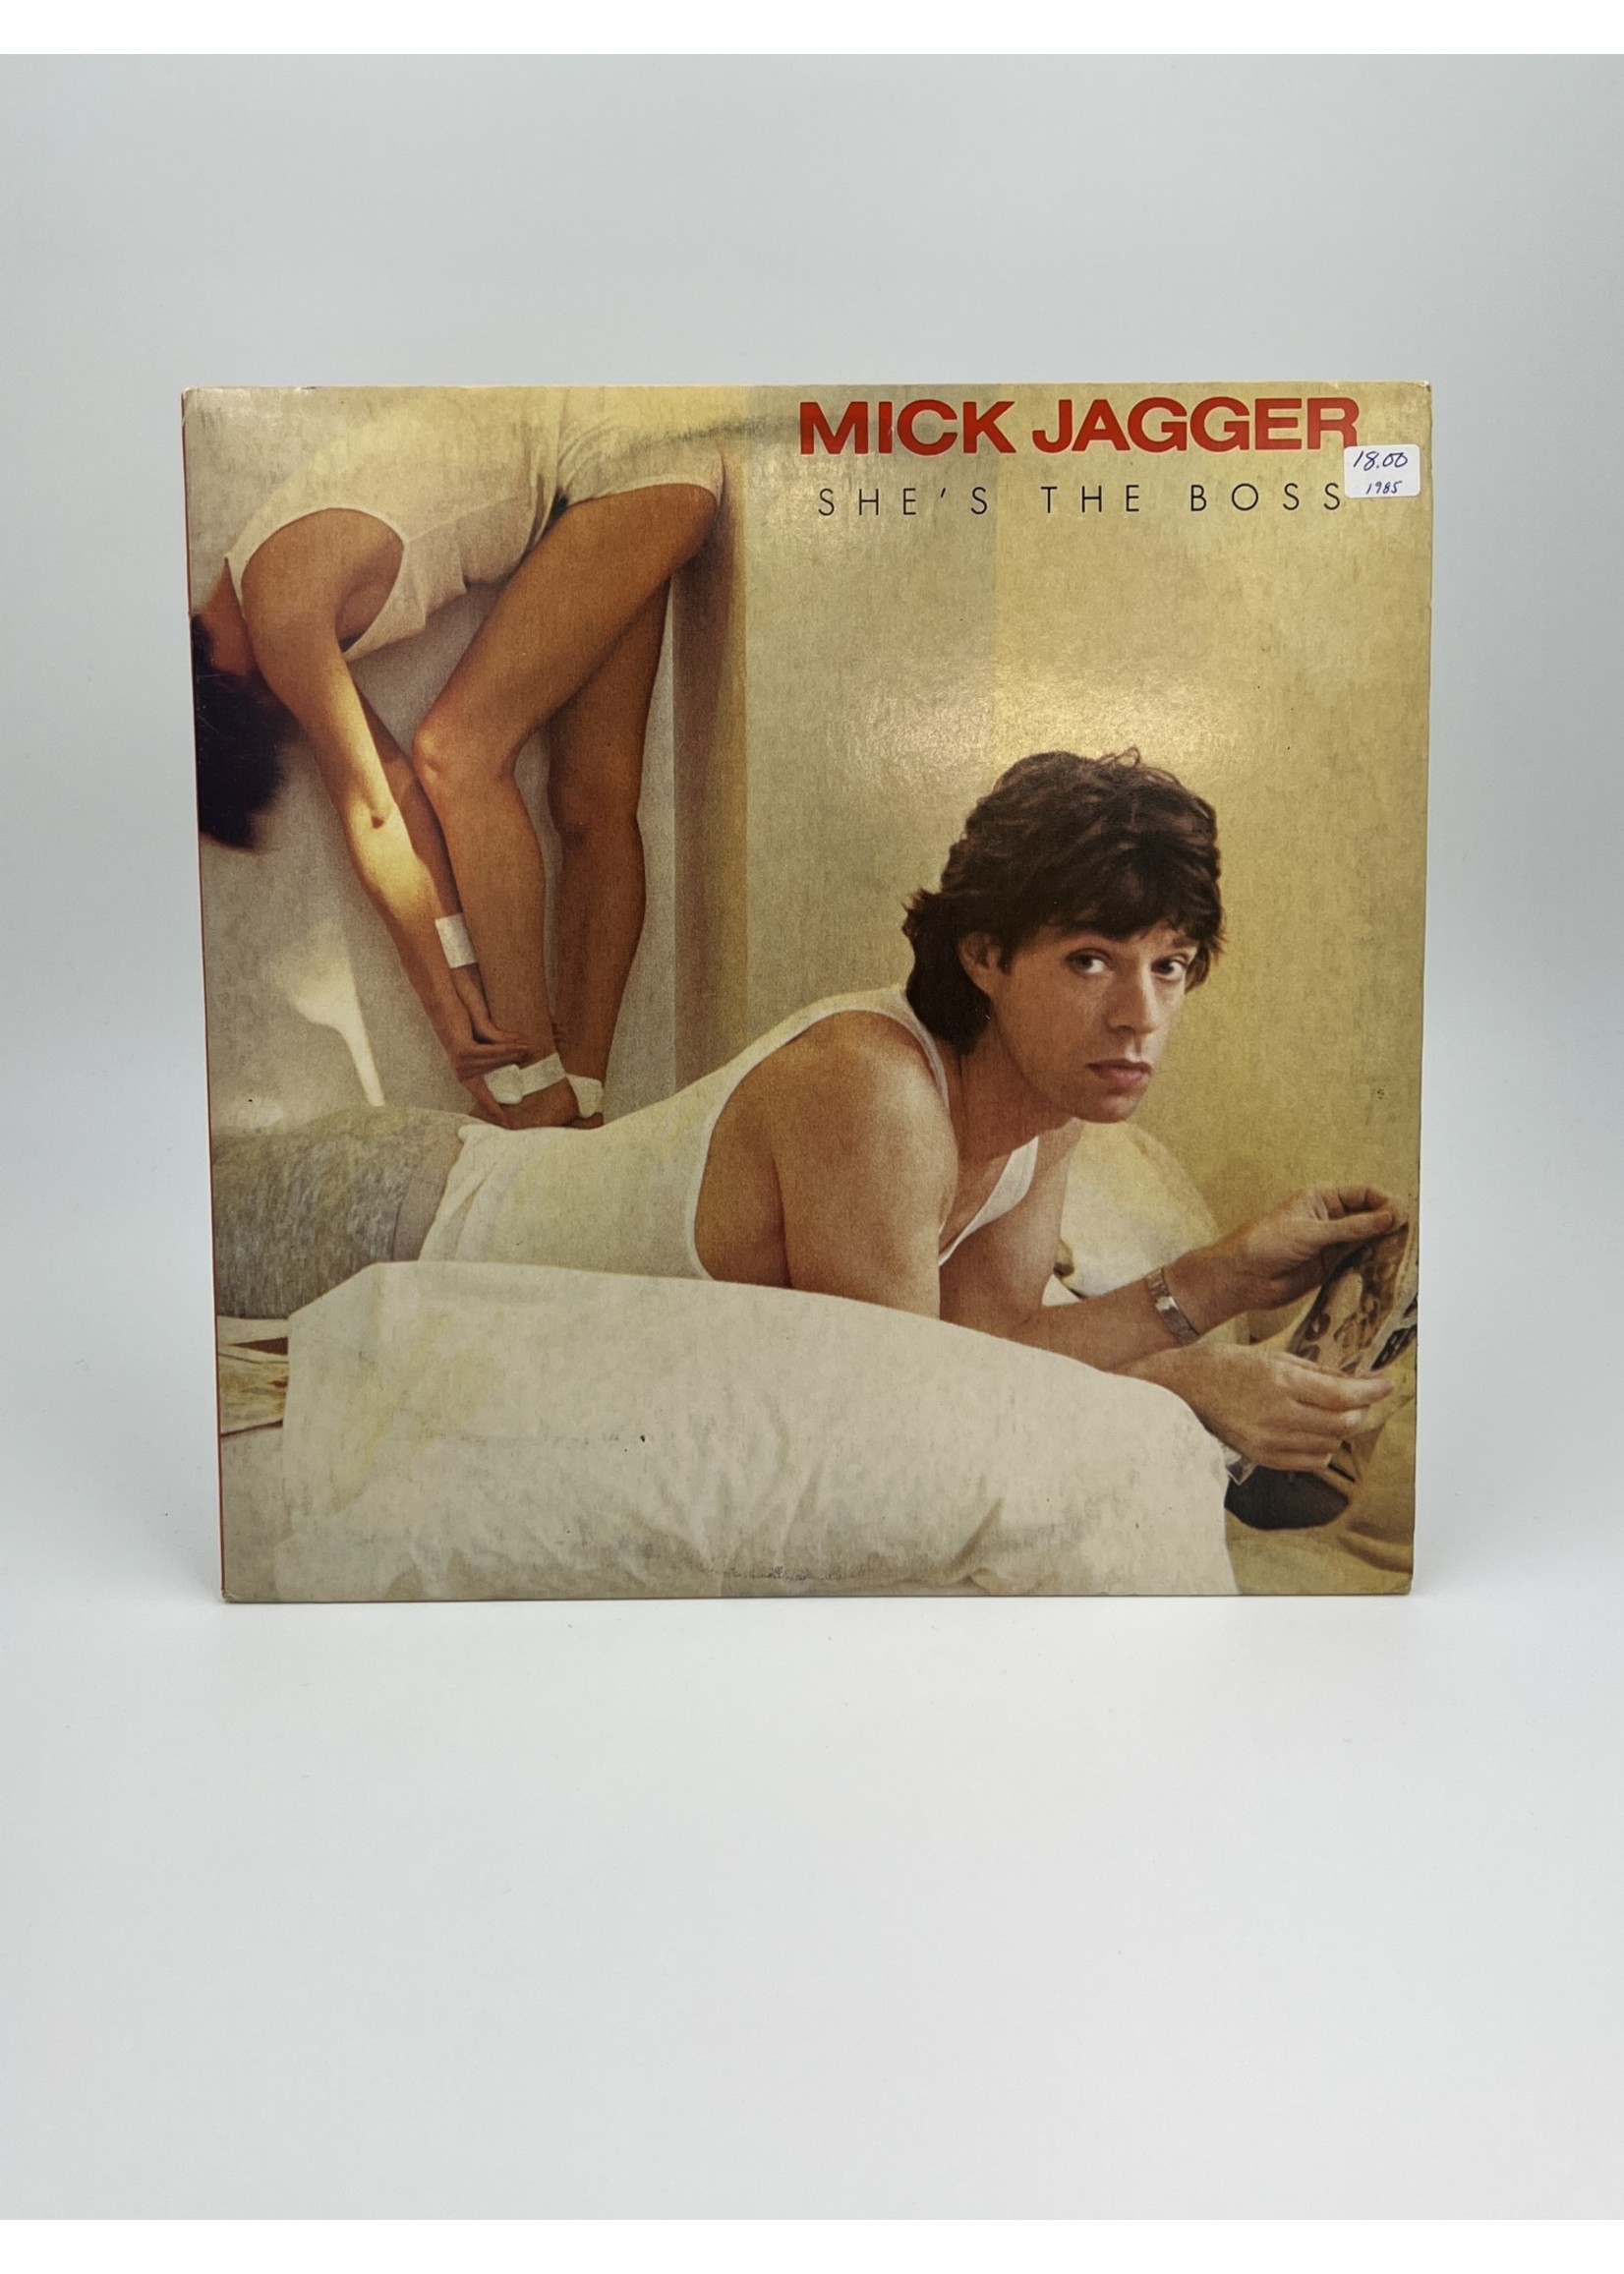 LP Mick Jagger Shes The Boss LP Record